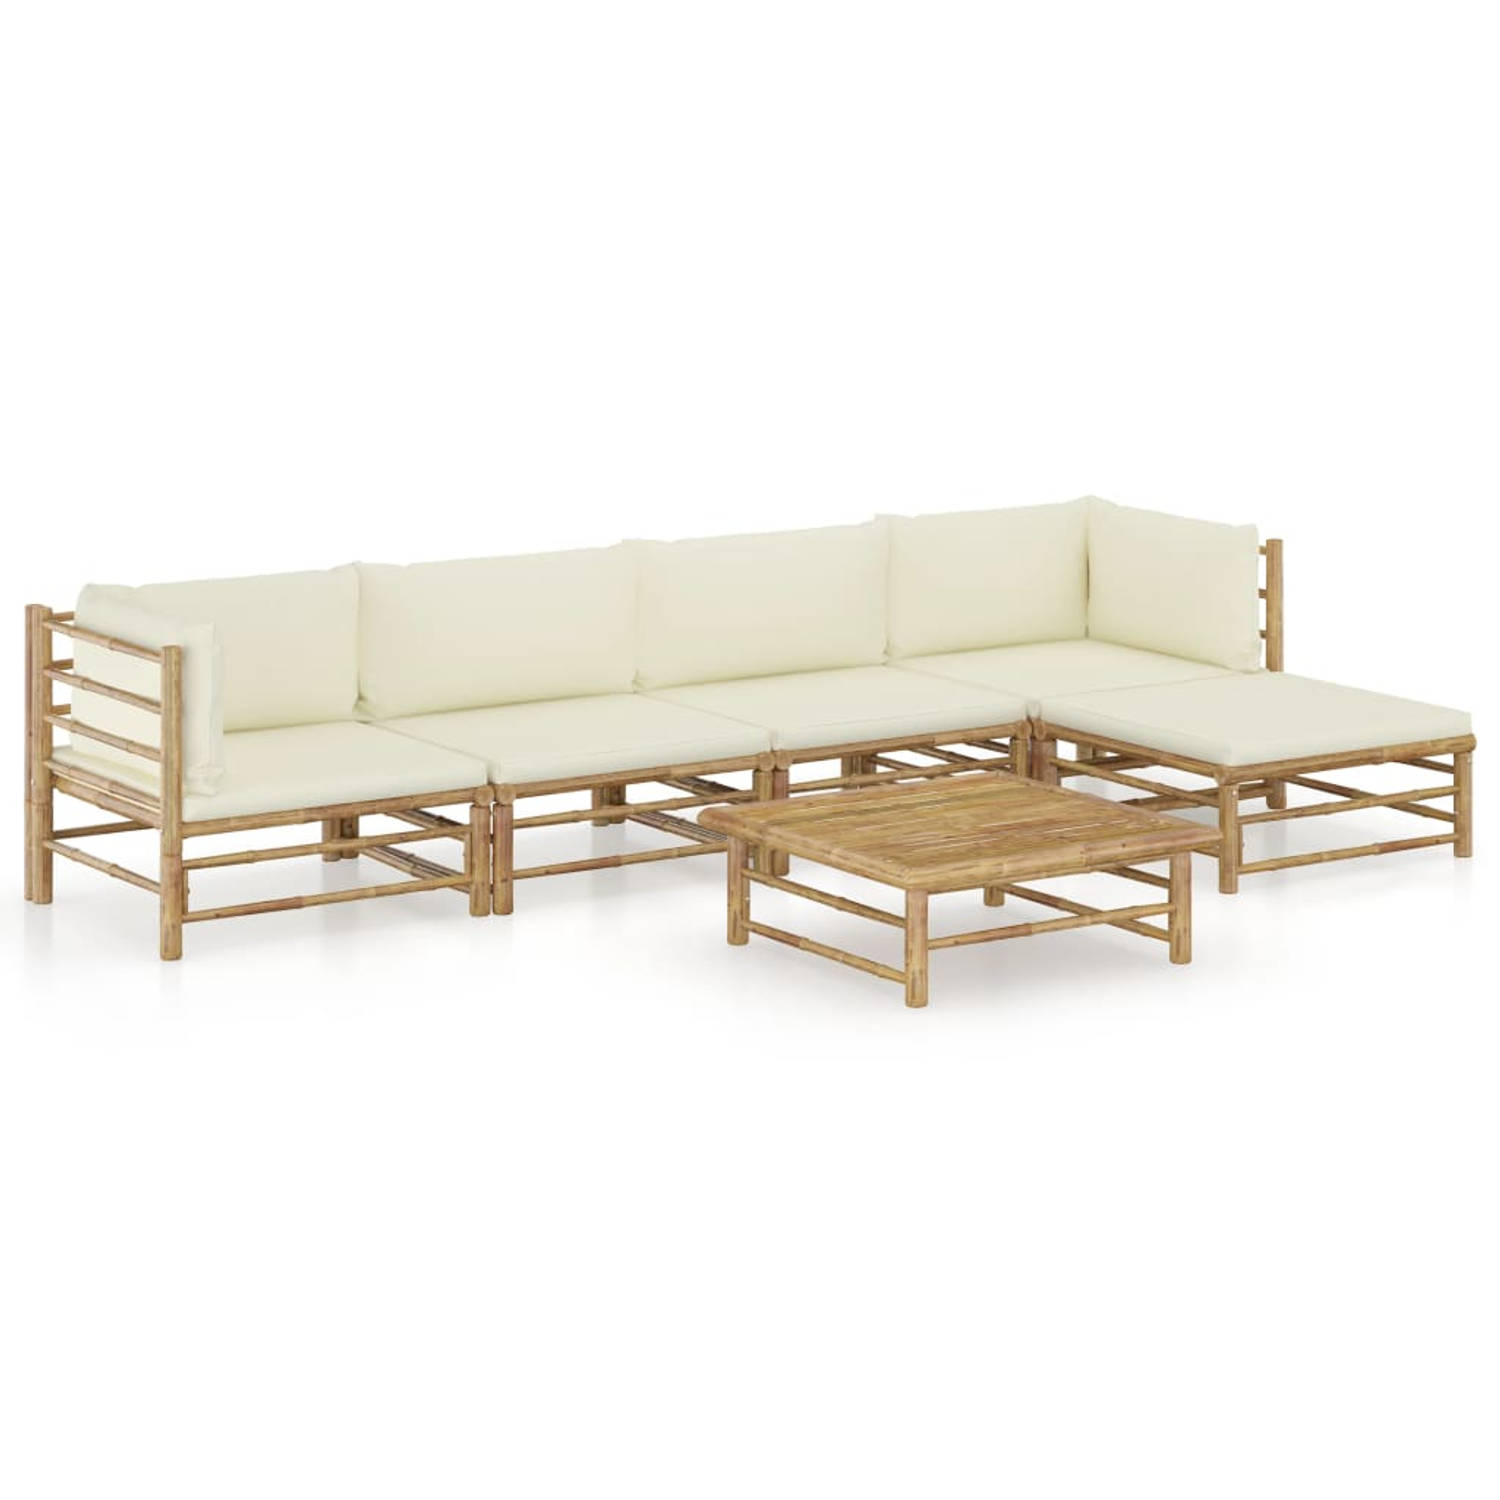 The Living Store 6-delige Loungeset met crèmewitte kussens bamboe - Tuinset